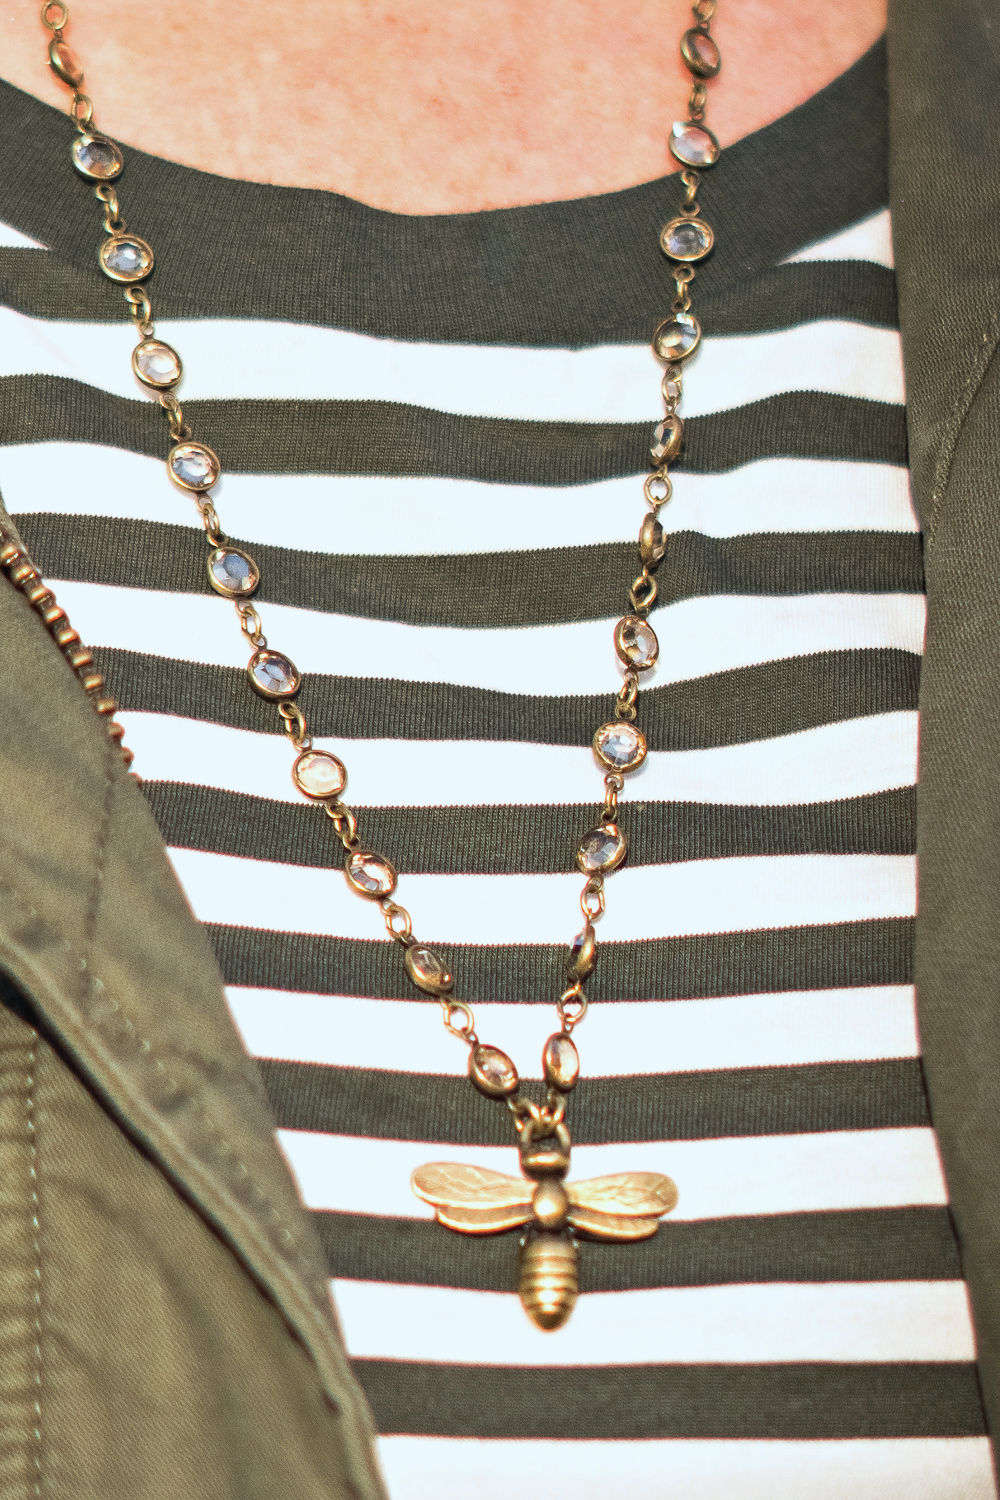 Style blogger Susan B. wears a crystal necklace with bee pendant and striped tee. Details at une femme d'un certain age.